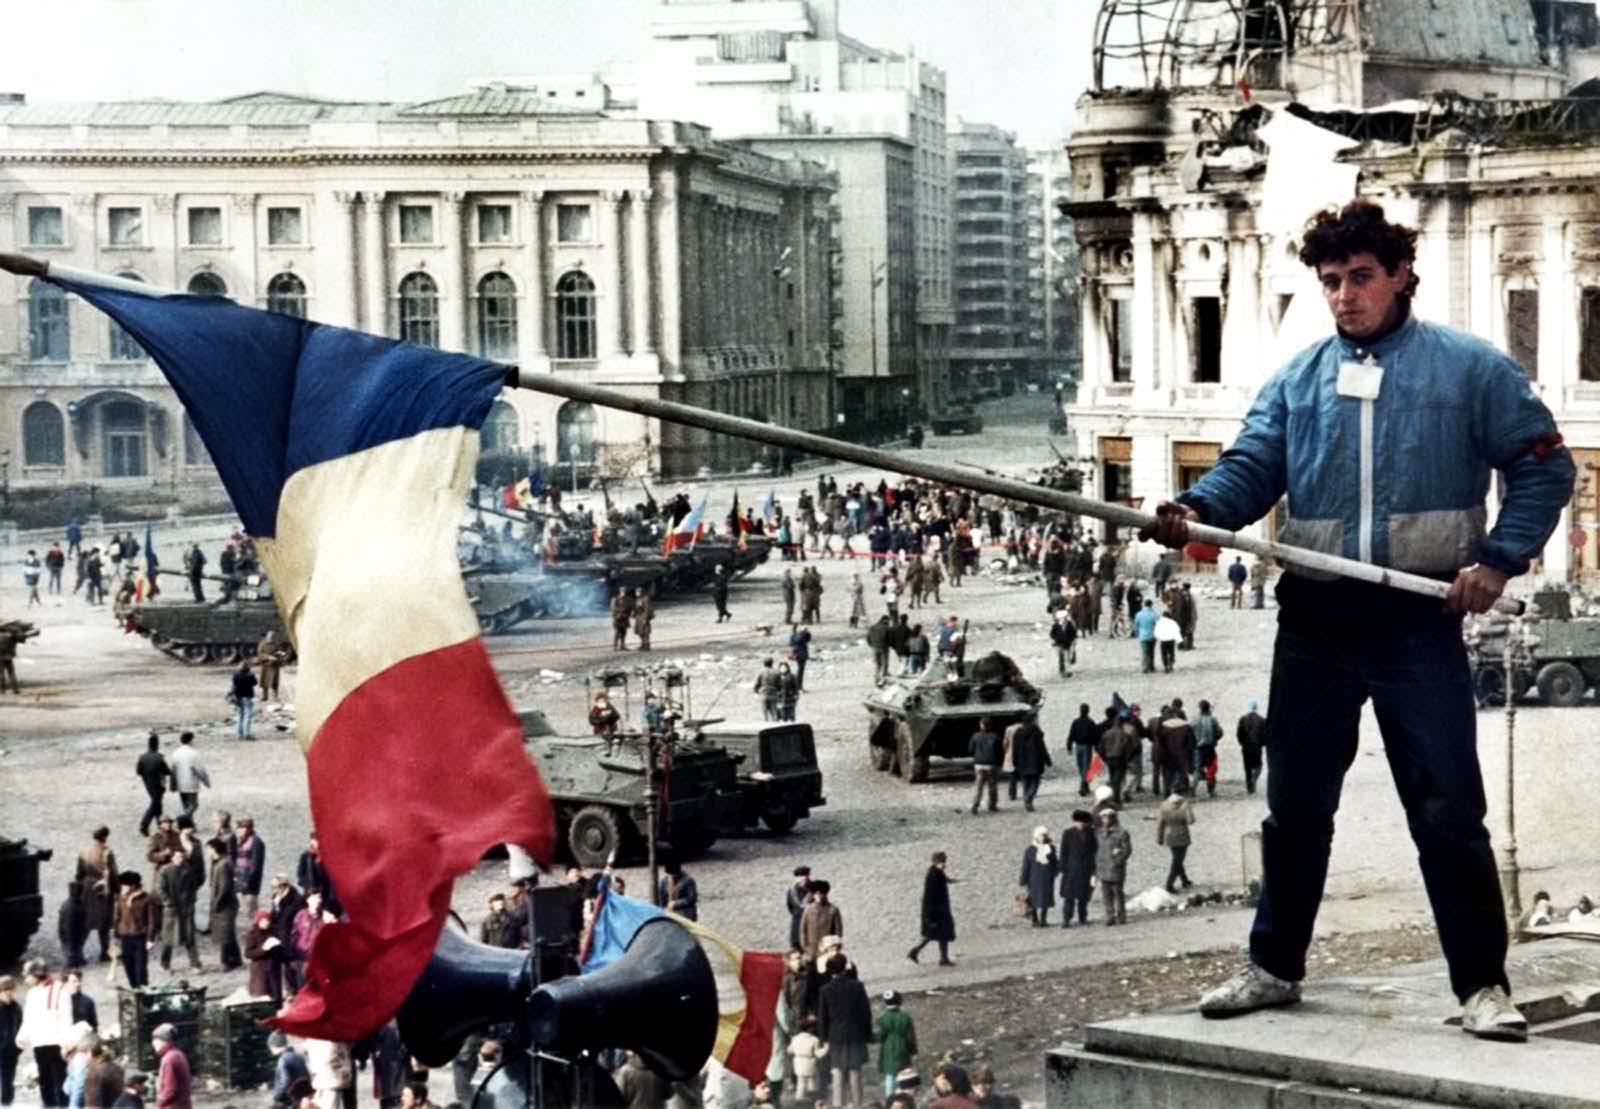 A Romanian citizen waves his flag as the center of Bucharest is captured by Revolutionary Forces during the Romanian Revolution in 1989. In a fast and strong move, Revolutionary Forces moved into the city and overthrew the communist regime, executing their former dictator and his wife. Up to 1200 people were killed in the 11 days of fighting, with the bulk of the government forces turning on the regime. Numerous images has everyday citizens joining the uprising. They would appear on tanks, in large scale marches, or even behind Revolutionary soldiers during attacks. It was a well documented uprising as the last of the Soviet Blocks of the Warsaw Pact in Europe came to an end.